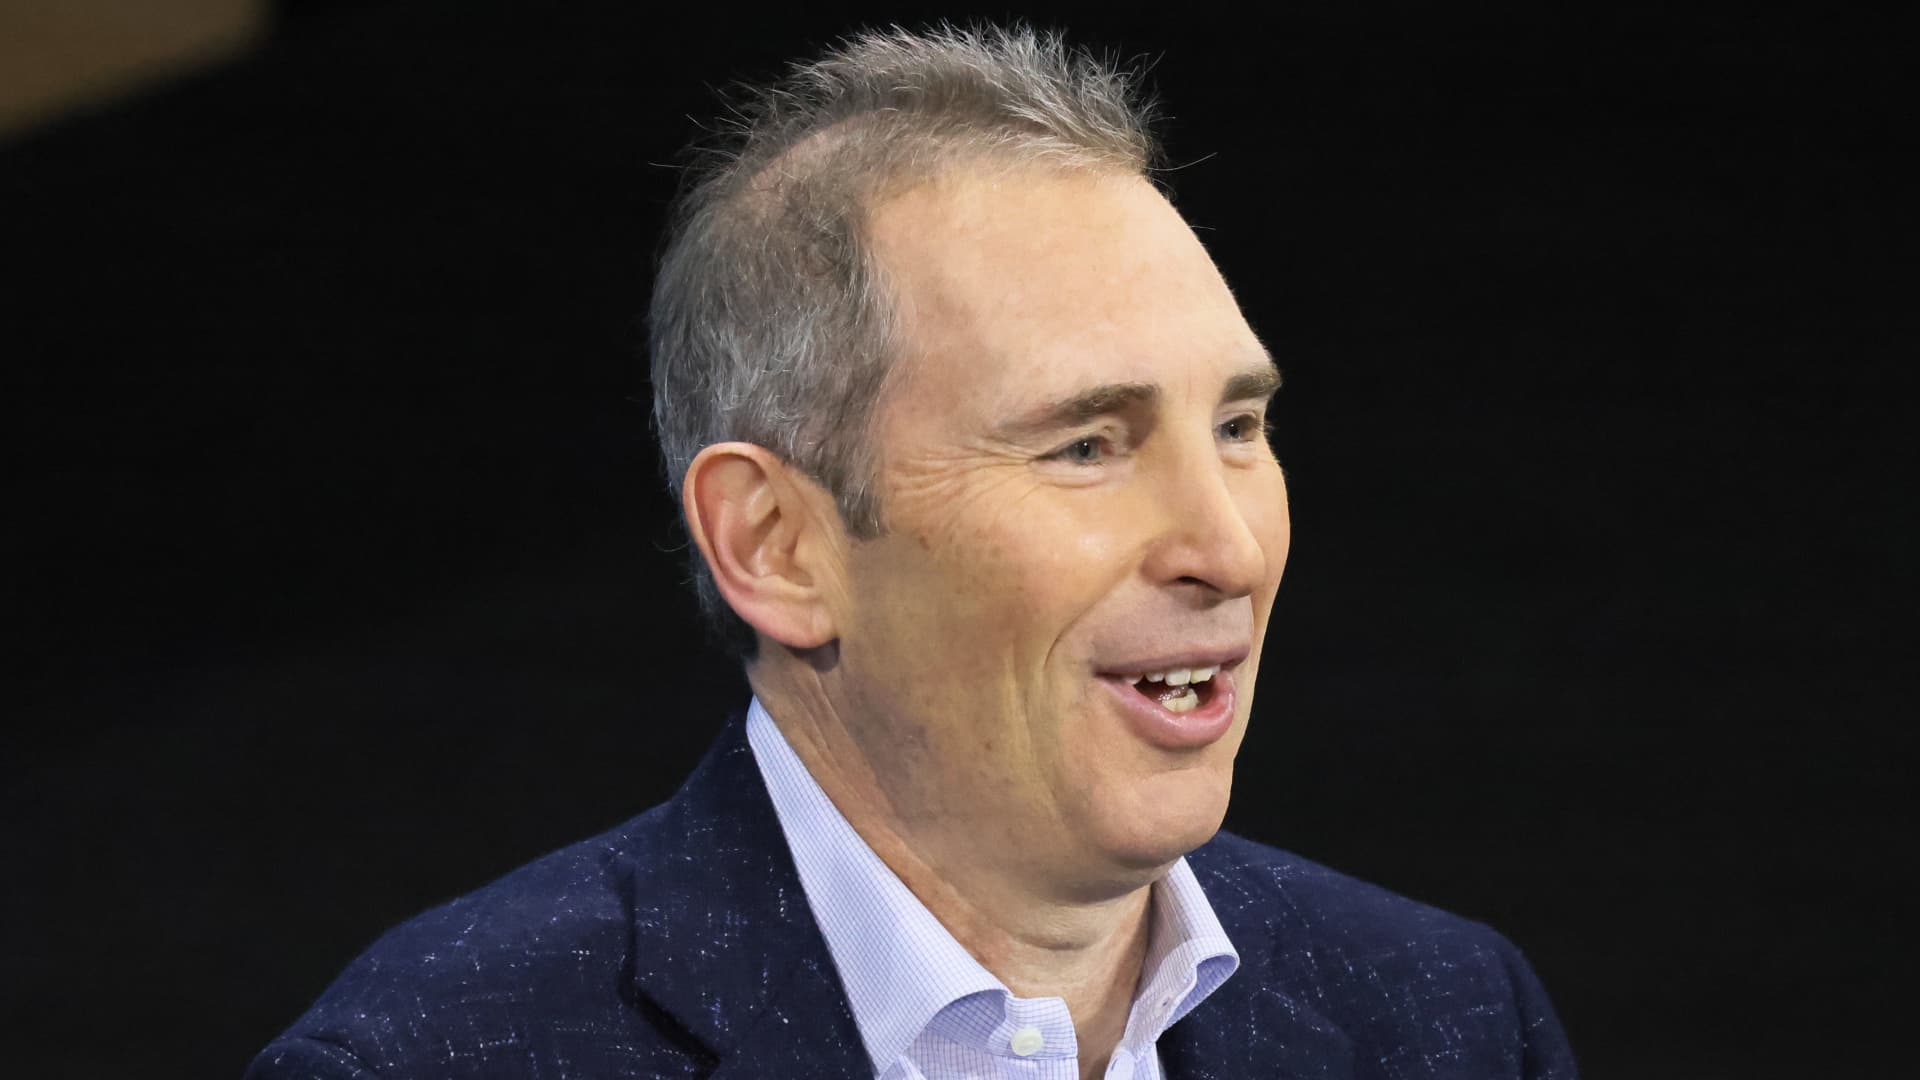 Amazon CEO Andy Jassy speaks during the New York Times DealBook Summit in the Appel Room at the Jazz At Lincoln Center on November 30, 2022 in New York City. 